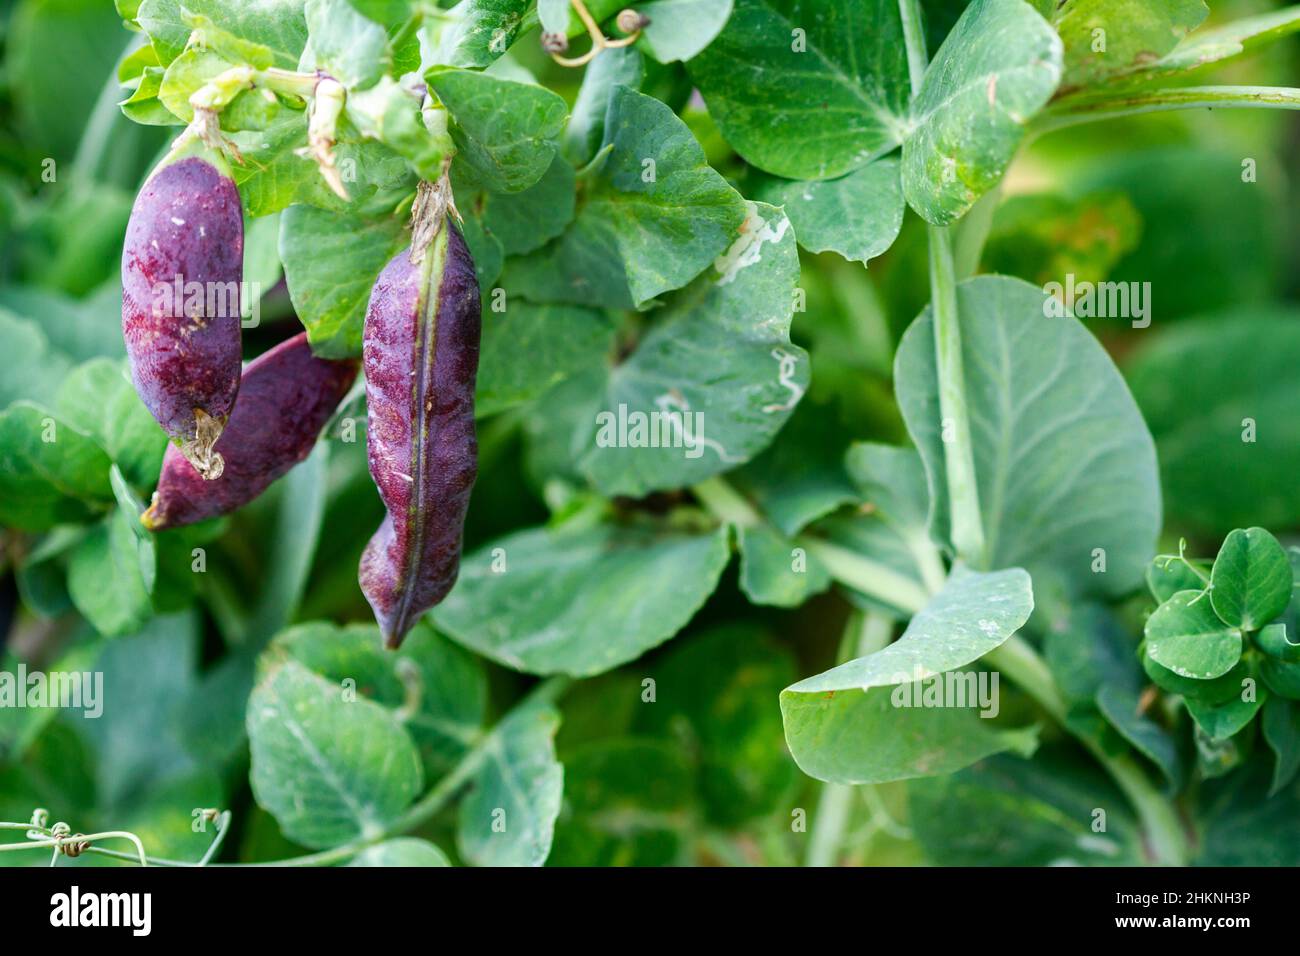 Close up shot of beans growing in the garden. Selective focus. Growing beans outdoors and blurred background. Stock Photo